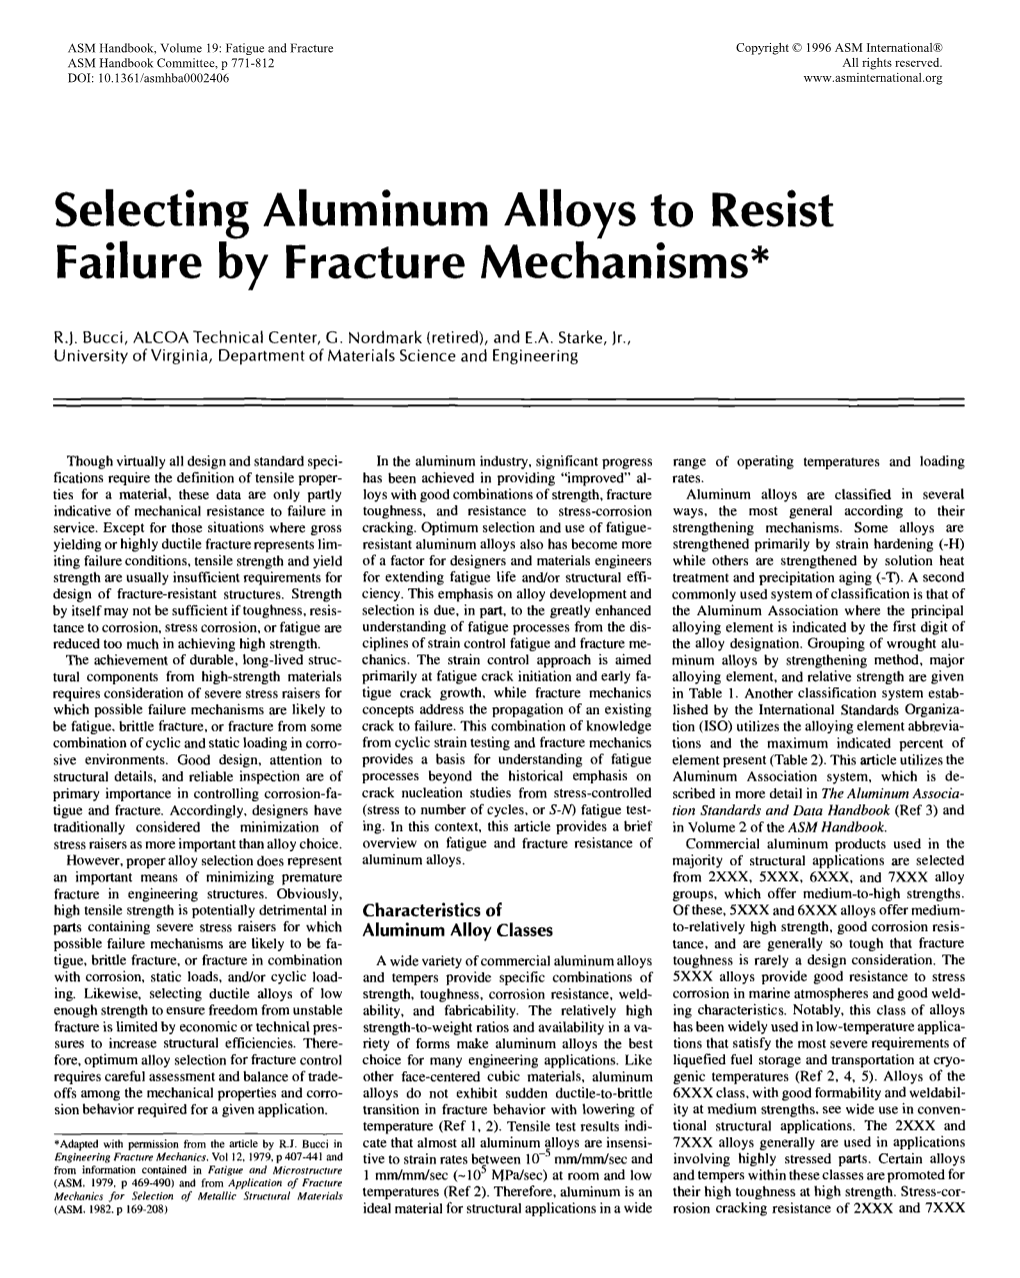 Selecting Aluminum Alloys to Resist Failure by Fracture Mechanisms*